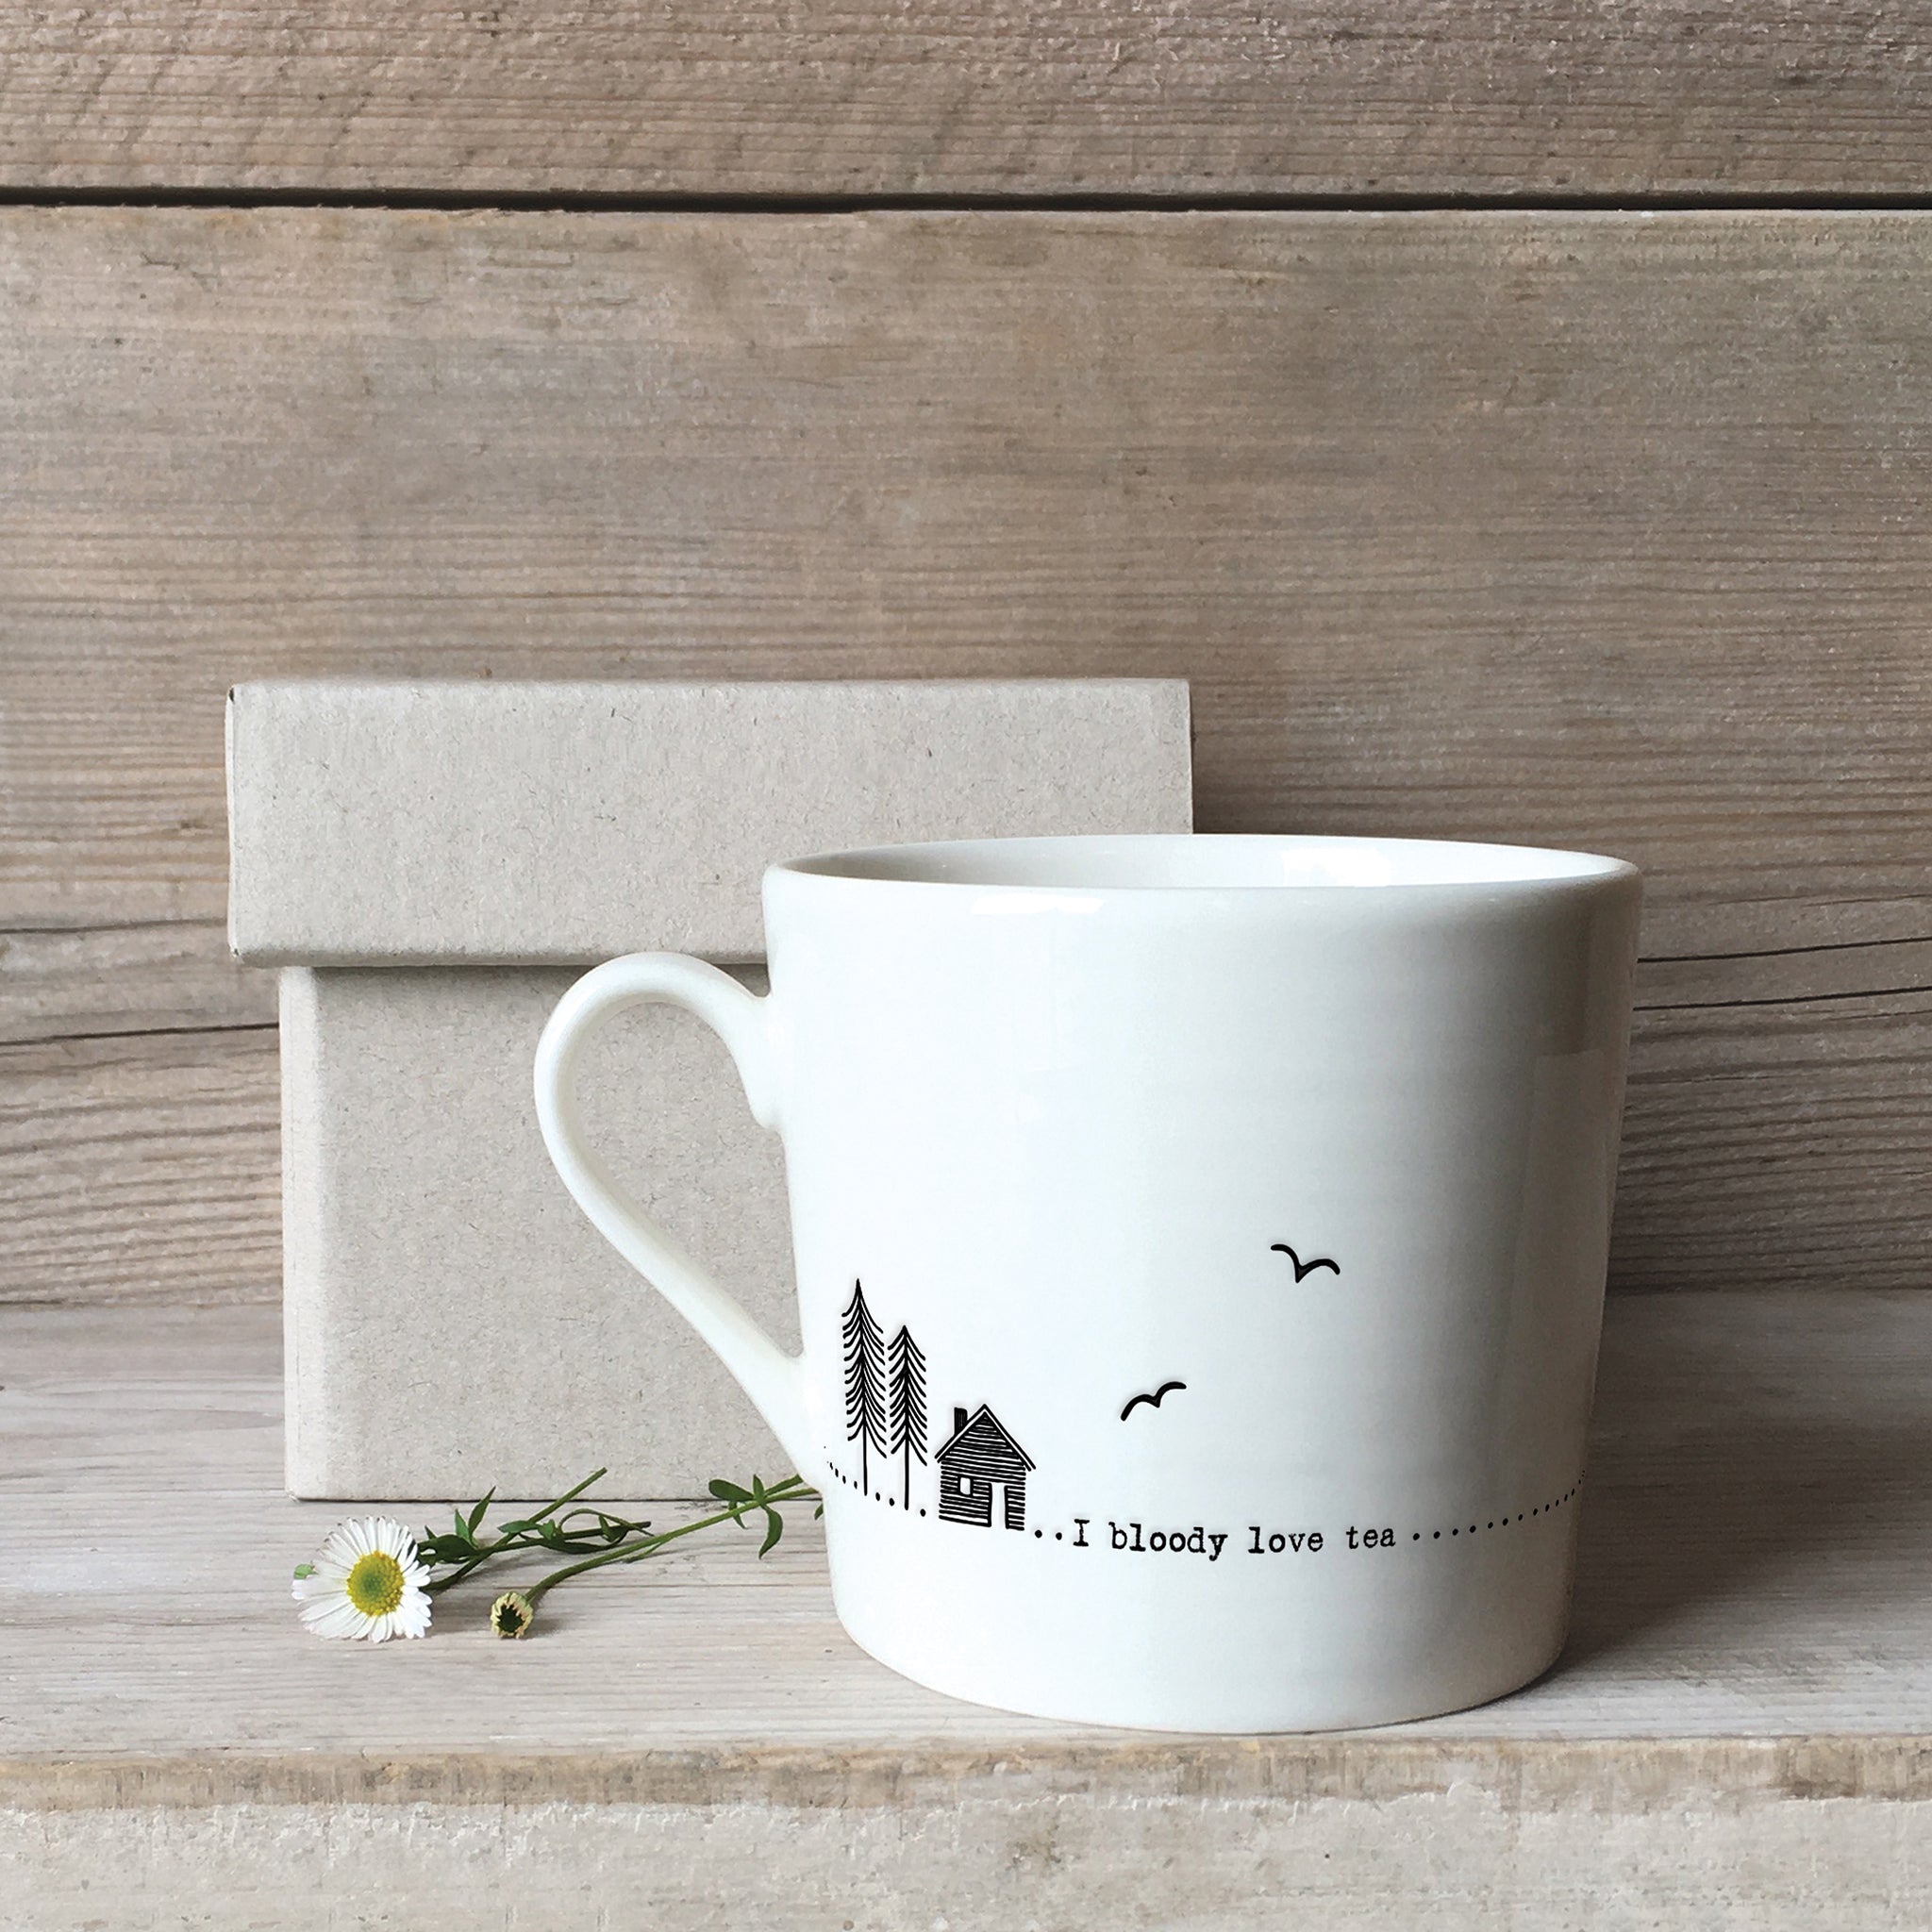 A white ceramic mug with a cabin illustration and a quote with a box